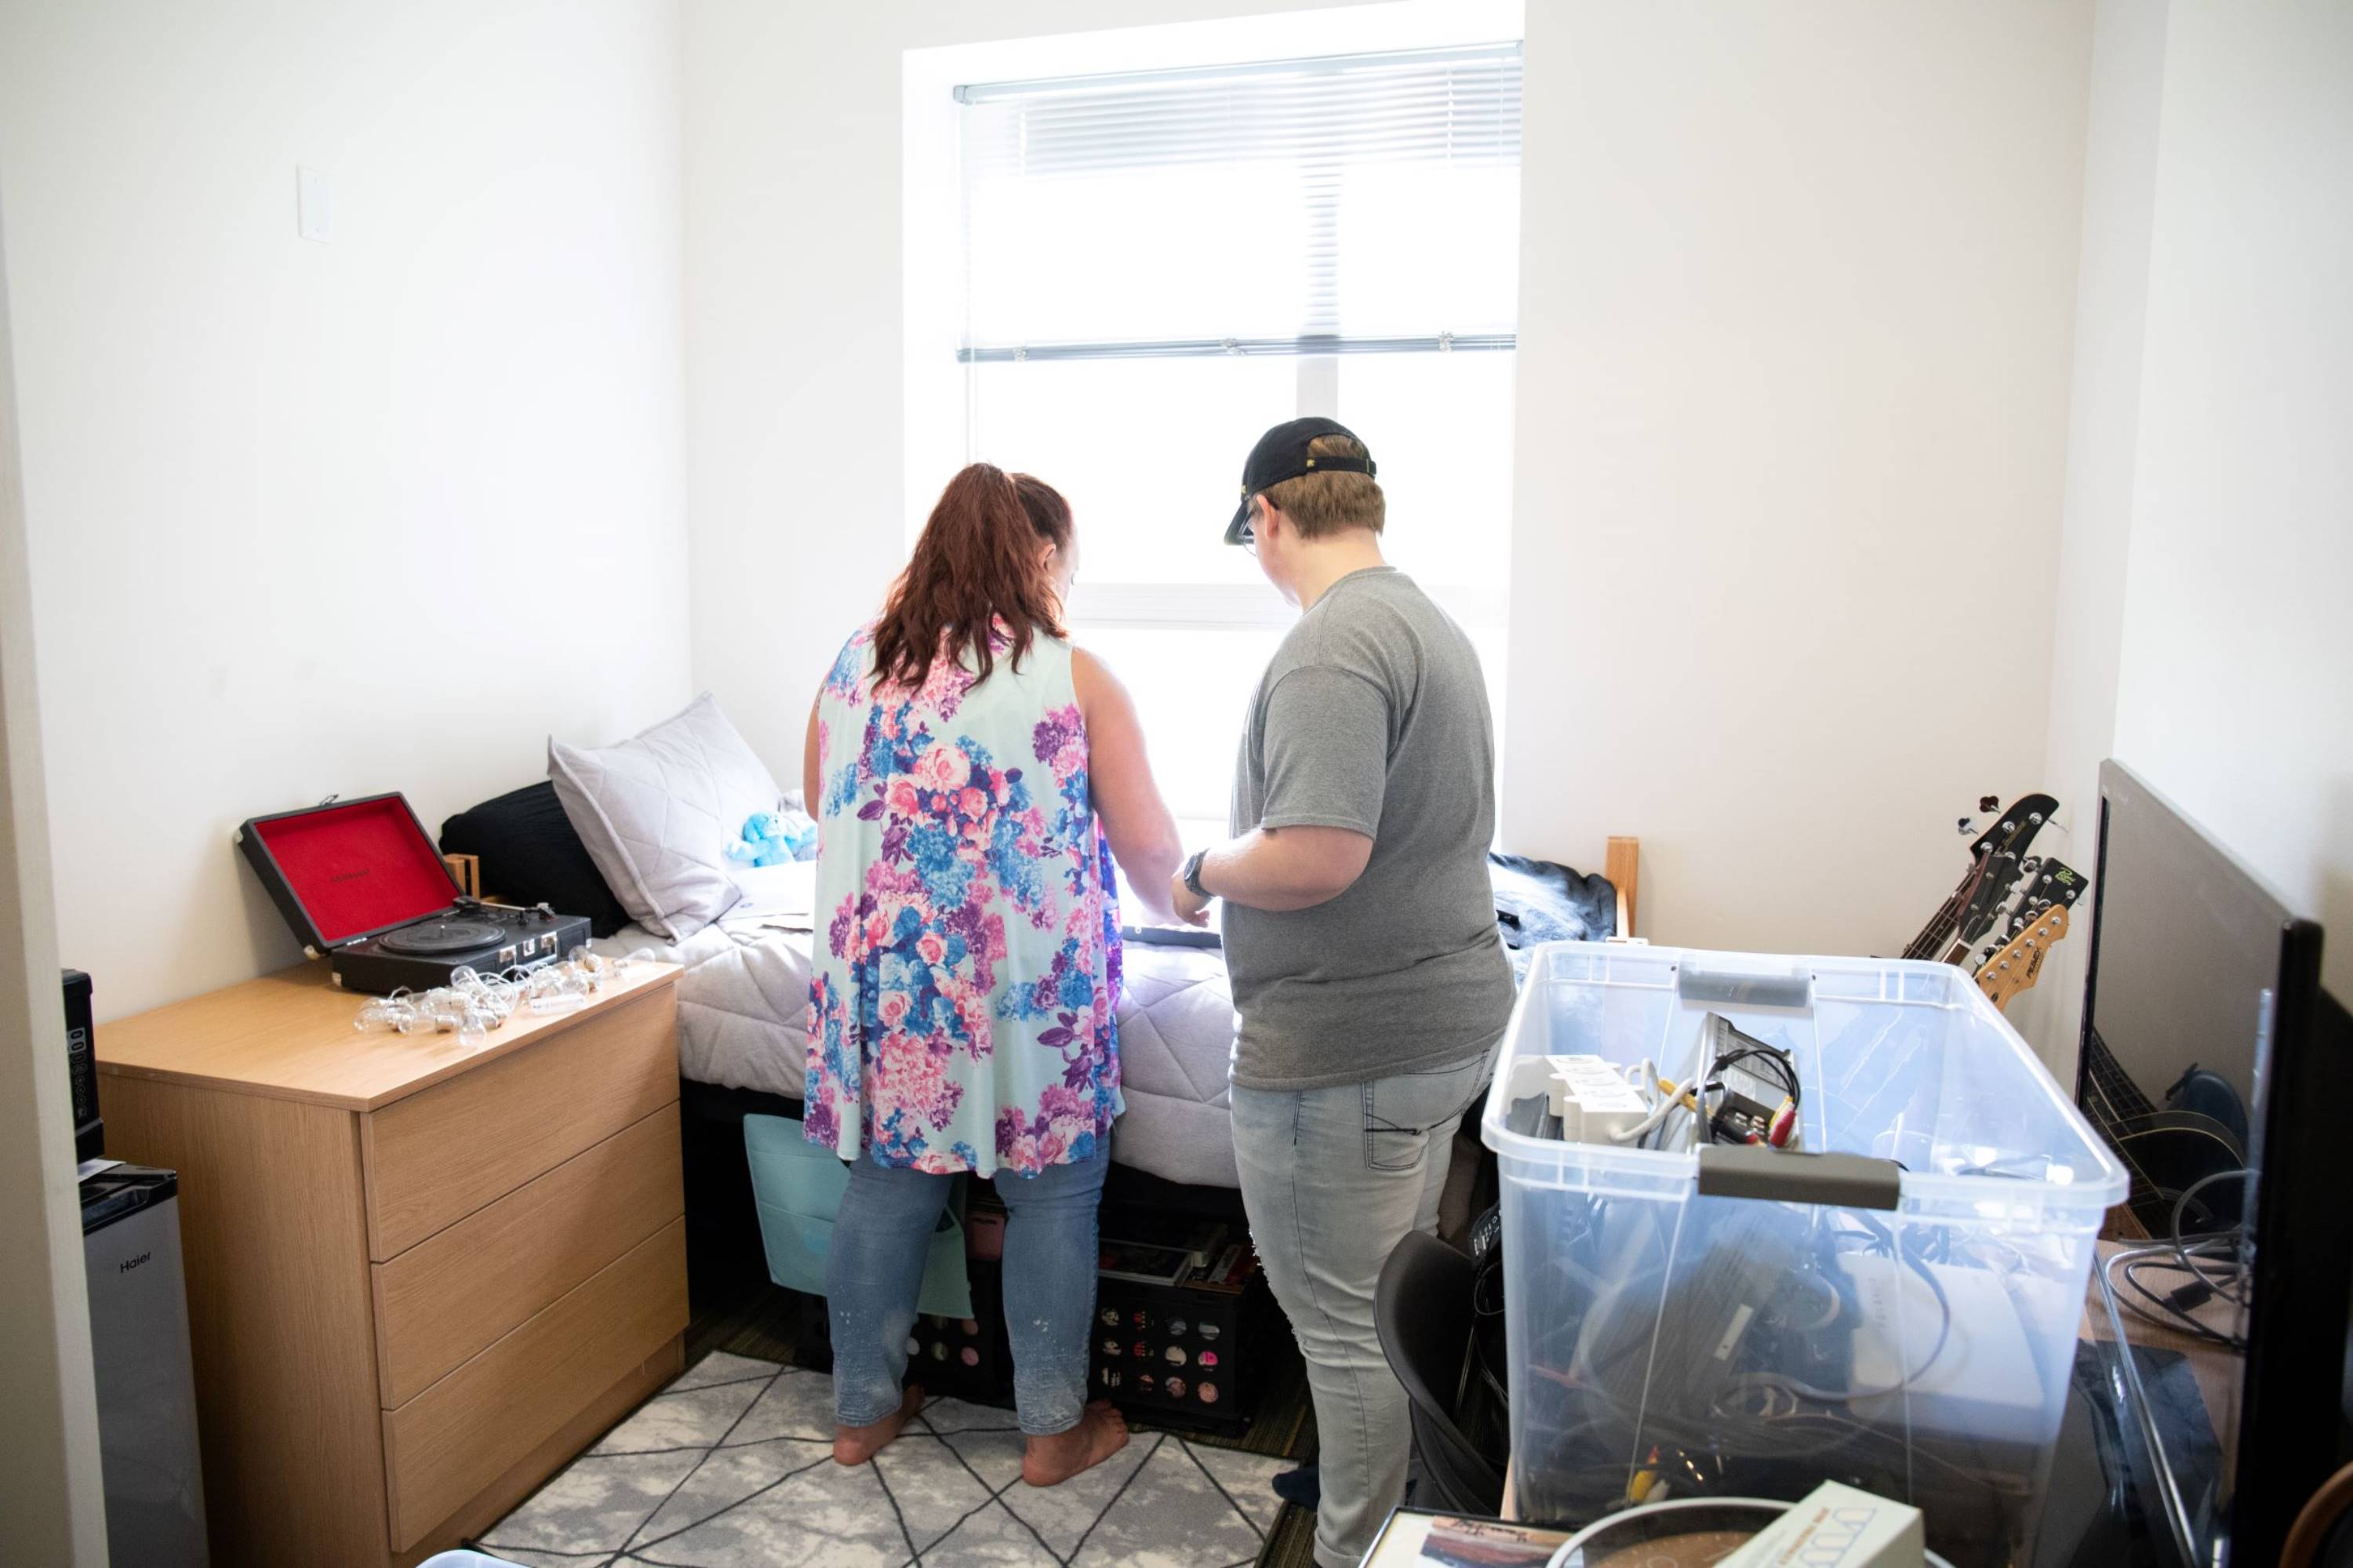 Mom helping their student move into a dorm room